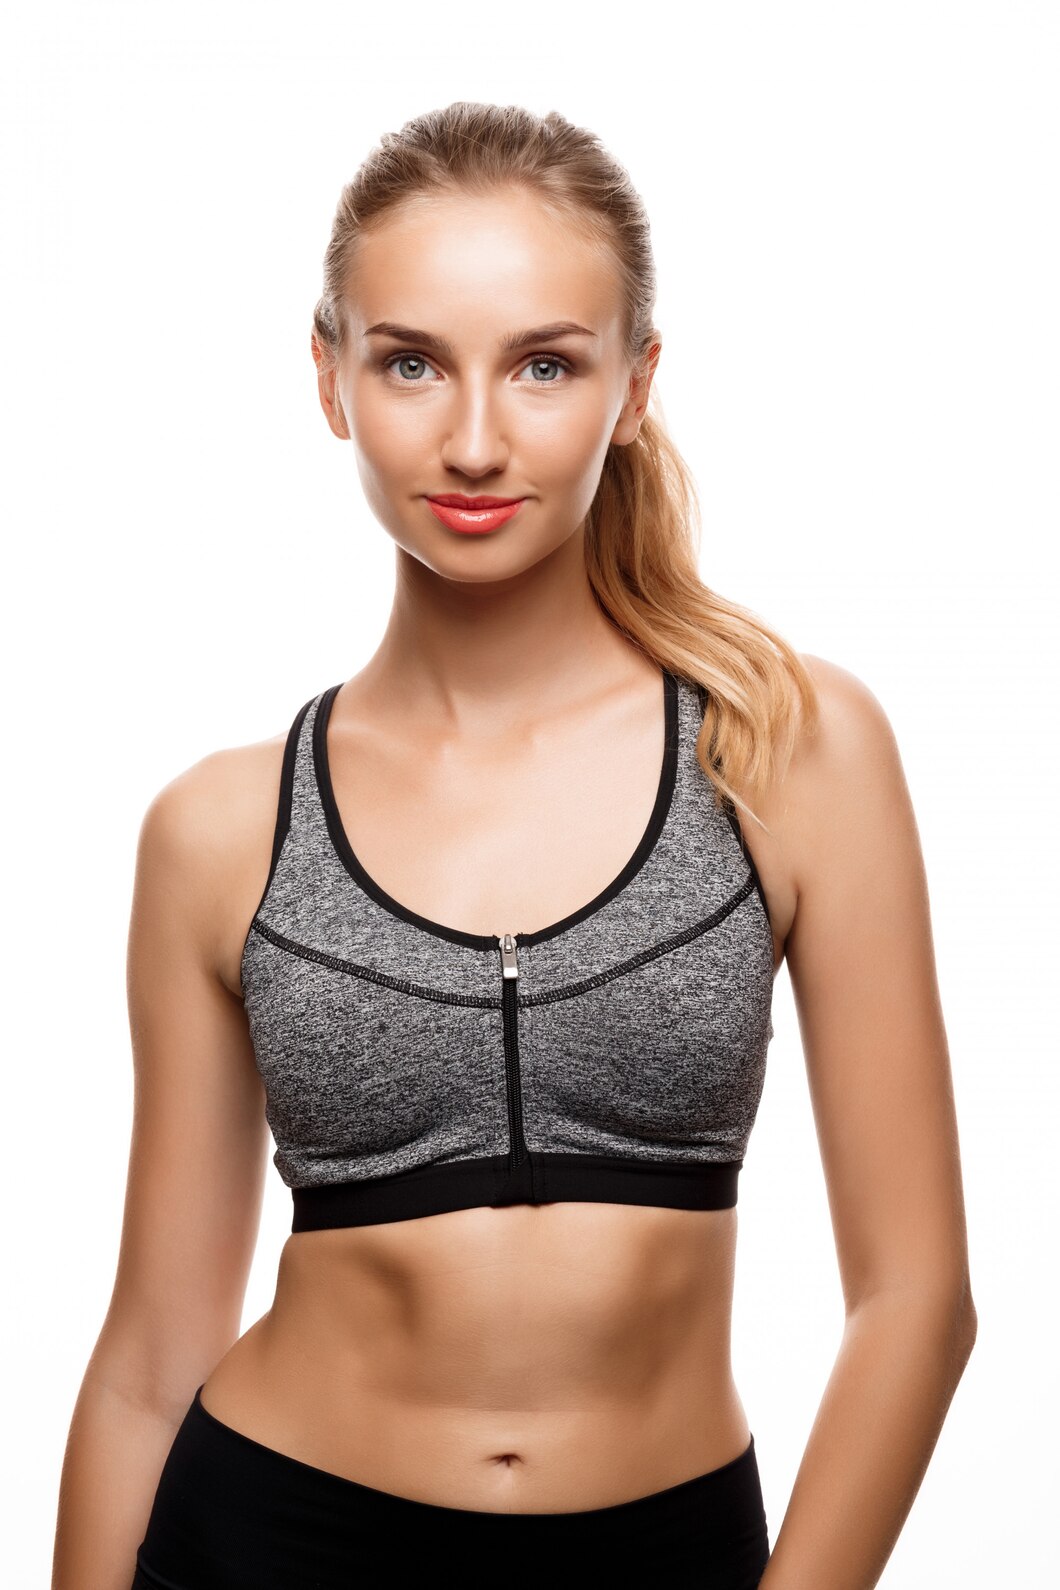 How can a sports bra better your gym routine? What are the features